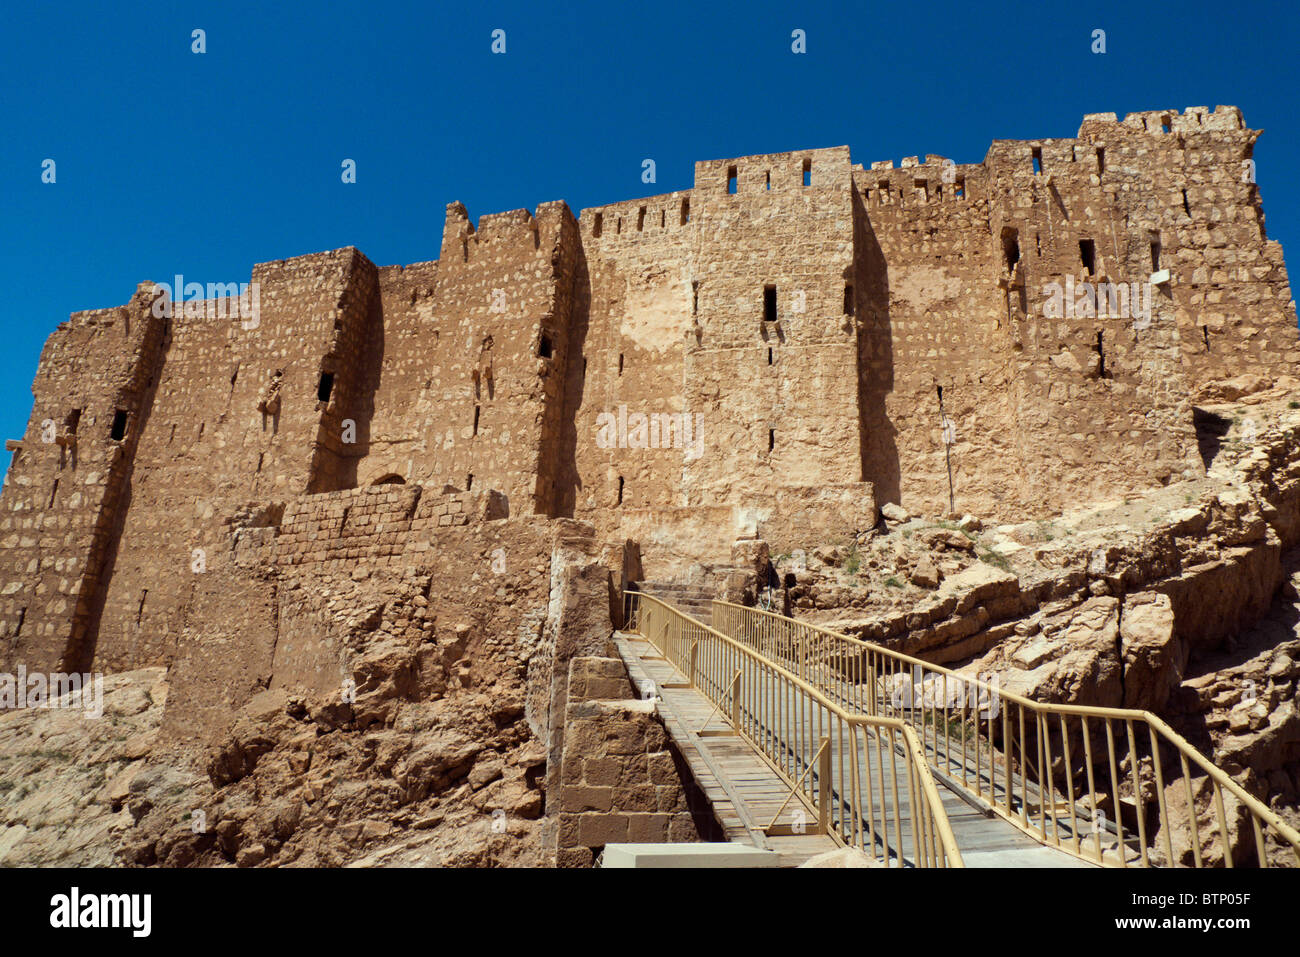 Palmyra Castle Fortress A World Heritage Site Of Ancient Origins From The Mamluk Period Also Known as Tadmor, Central Syria Stock Photo